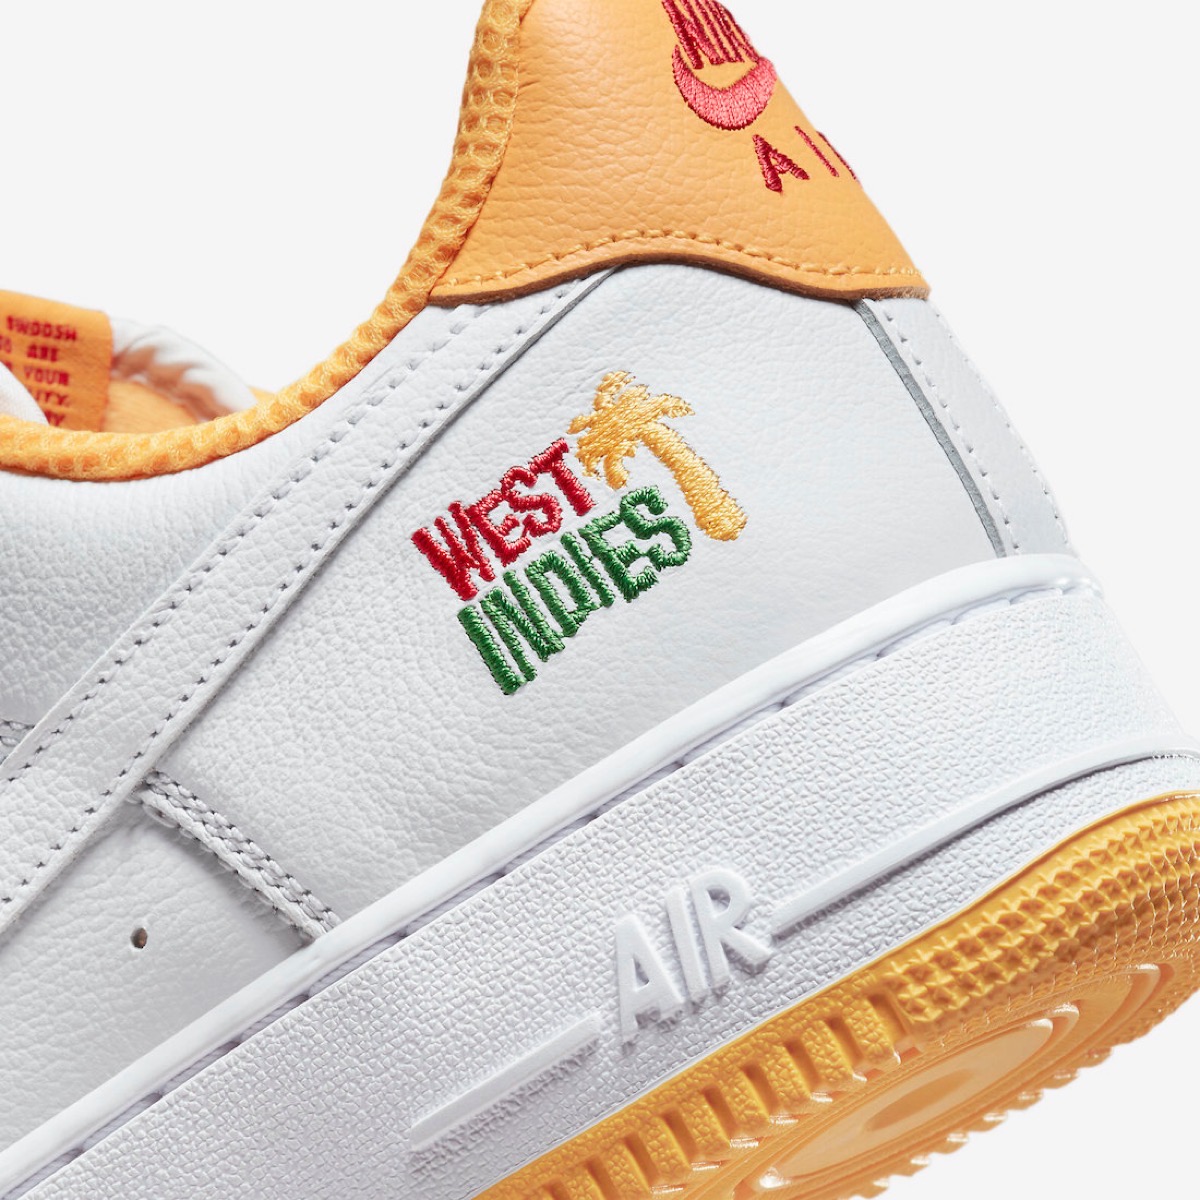 Nike Air Force 1 Low Retro QS “West Indies 2”が国内8月25日に復刻 